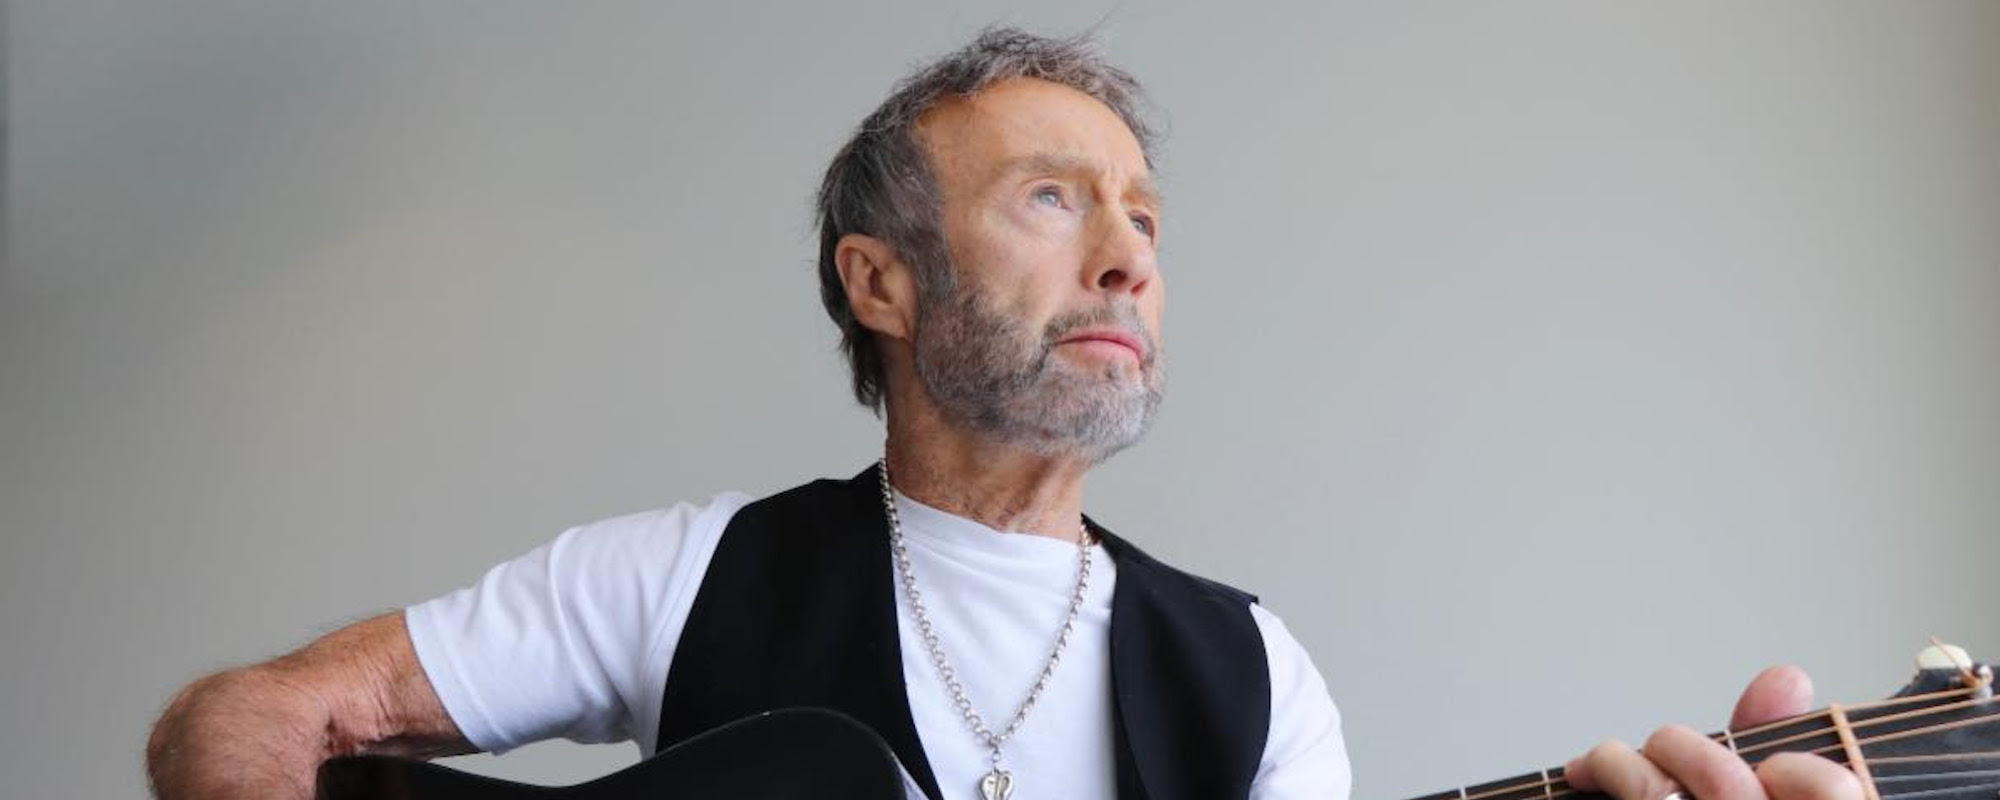 Paul Rodgers Revisits Queen-Era Favorite on Solo Single “Take Love”